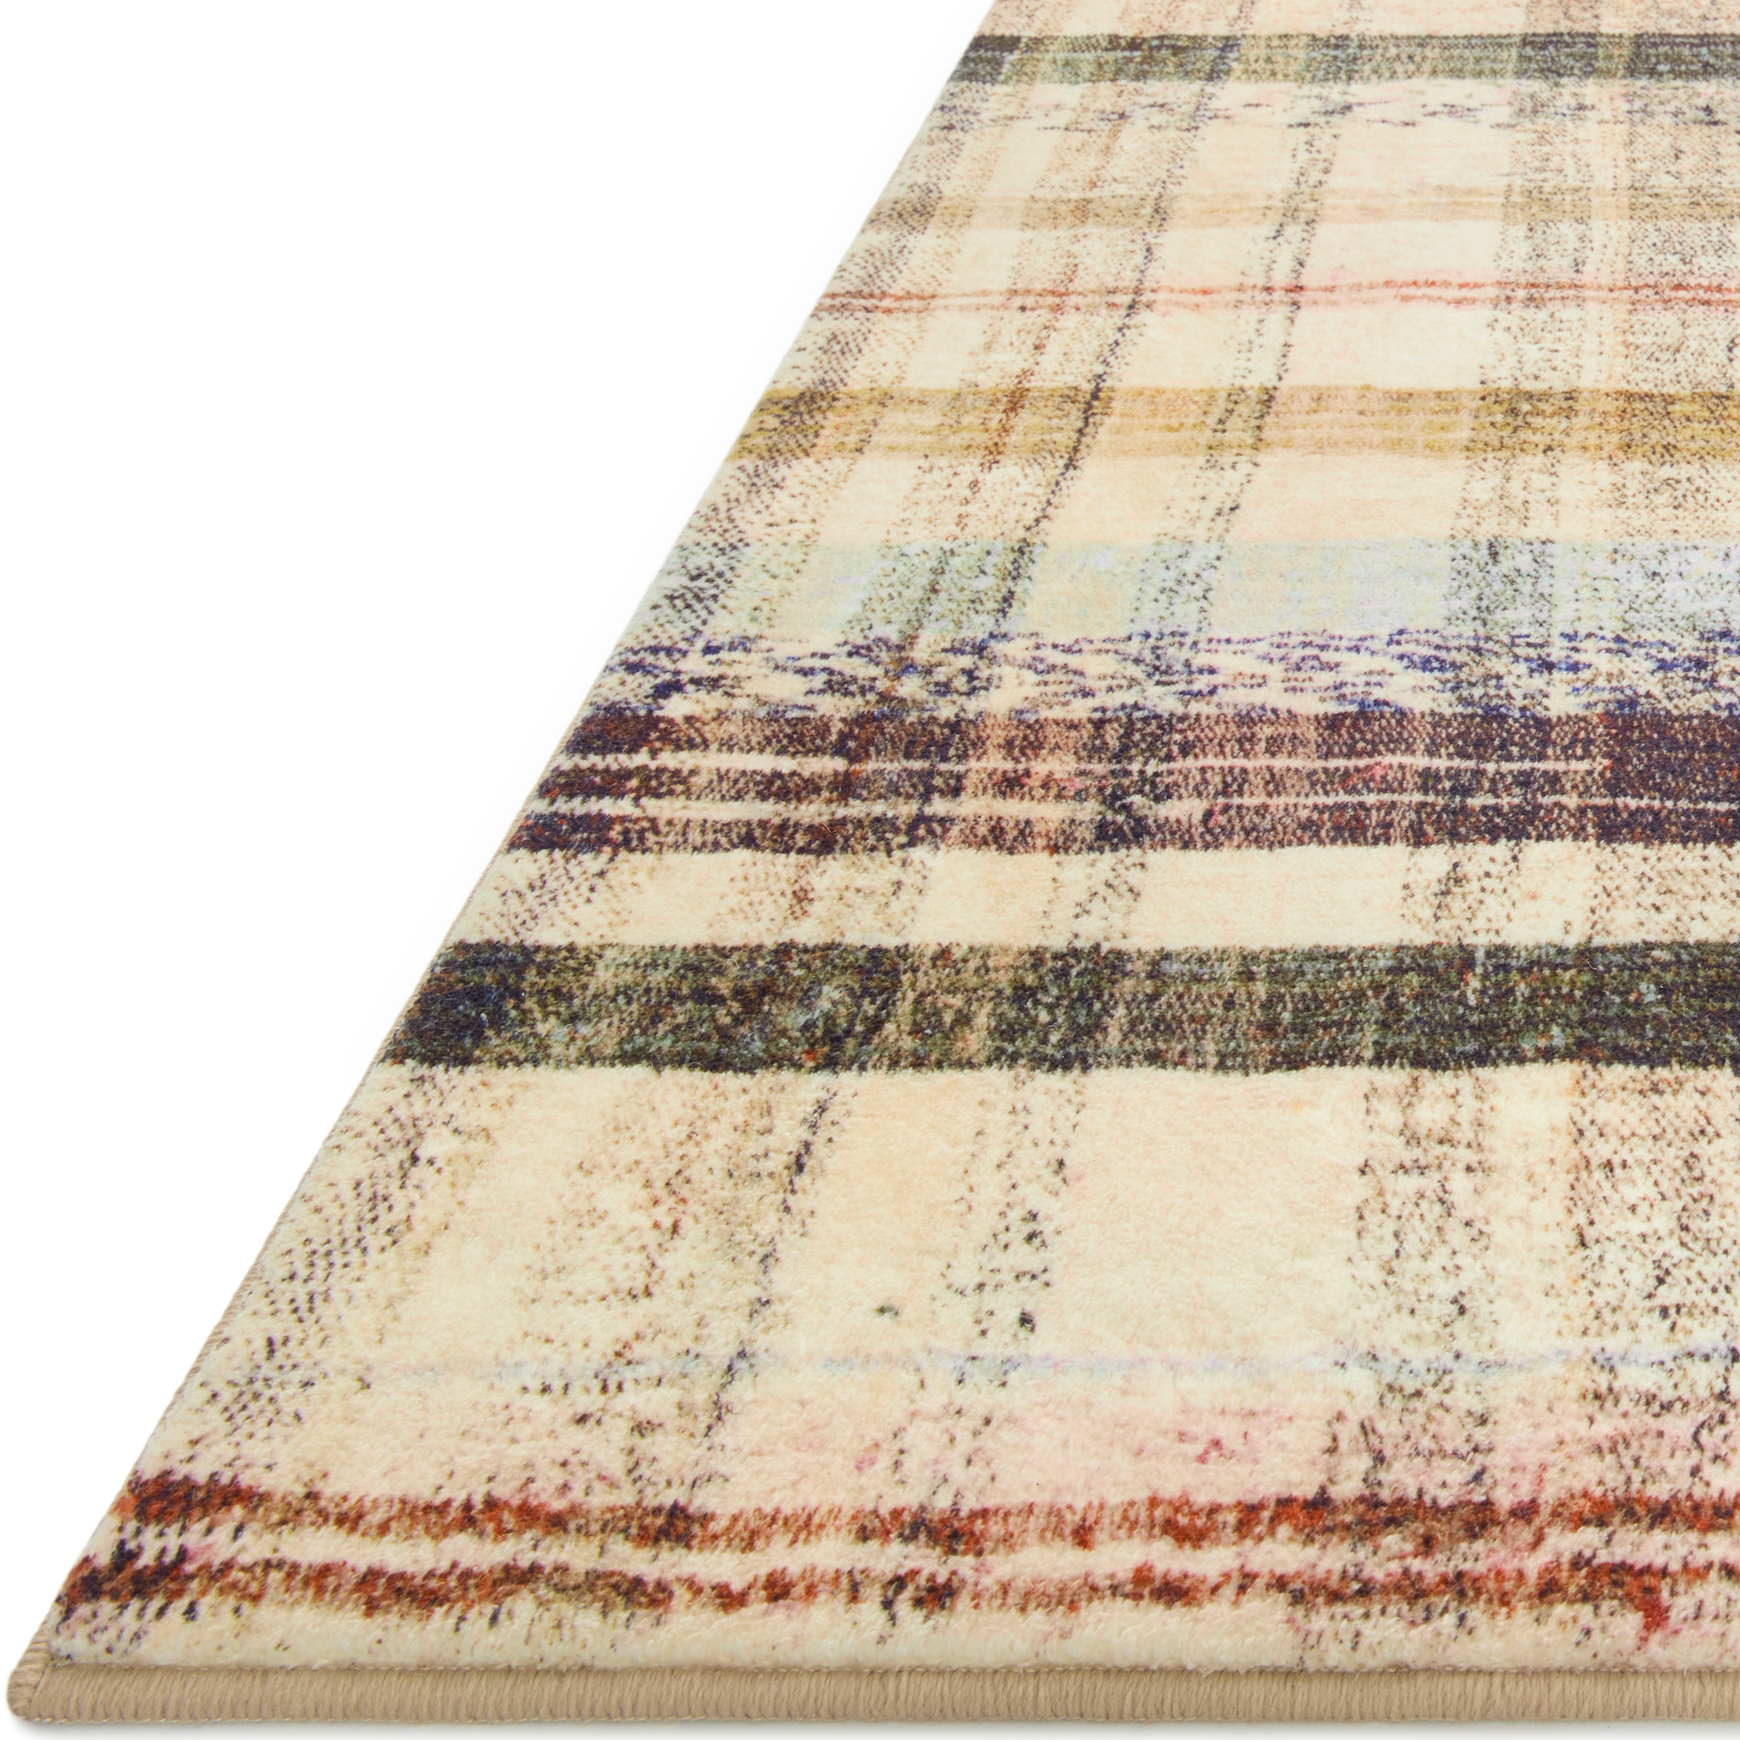 This trademarked “cloud pile” feel by Loloi rugs is sooooo cozy. The Humphrey Ivory / Multi rug needs to be in a bedroom or a fun hangout spot pronto! Amethyst favorite! Amethyst Home provides interior design services, furniture, rugs, and lighting in the Austin metro area.